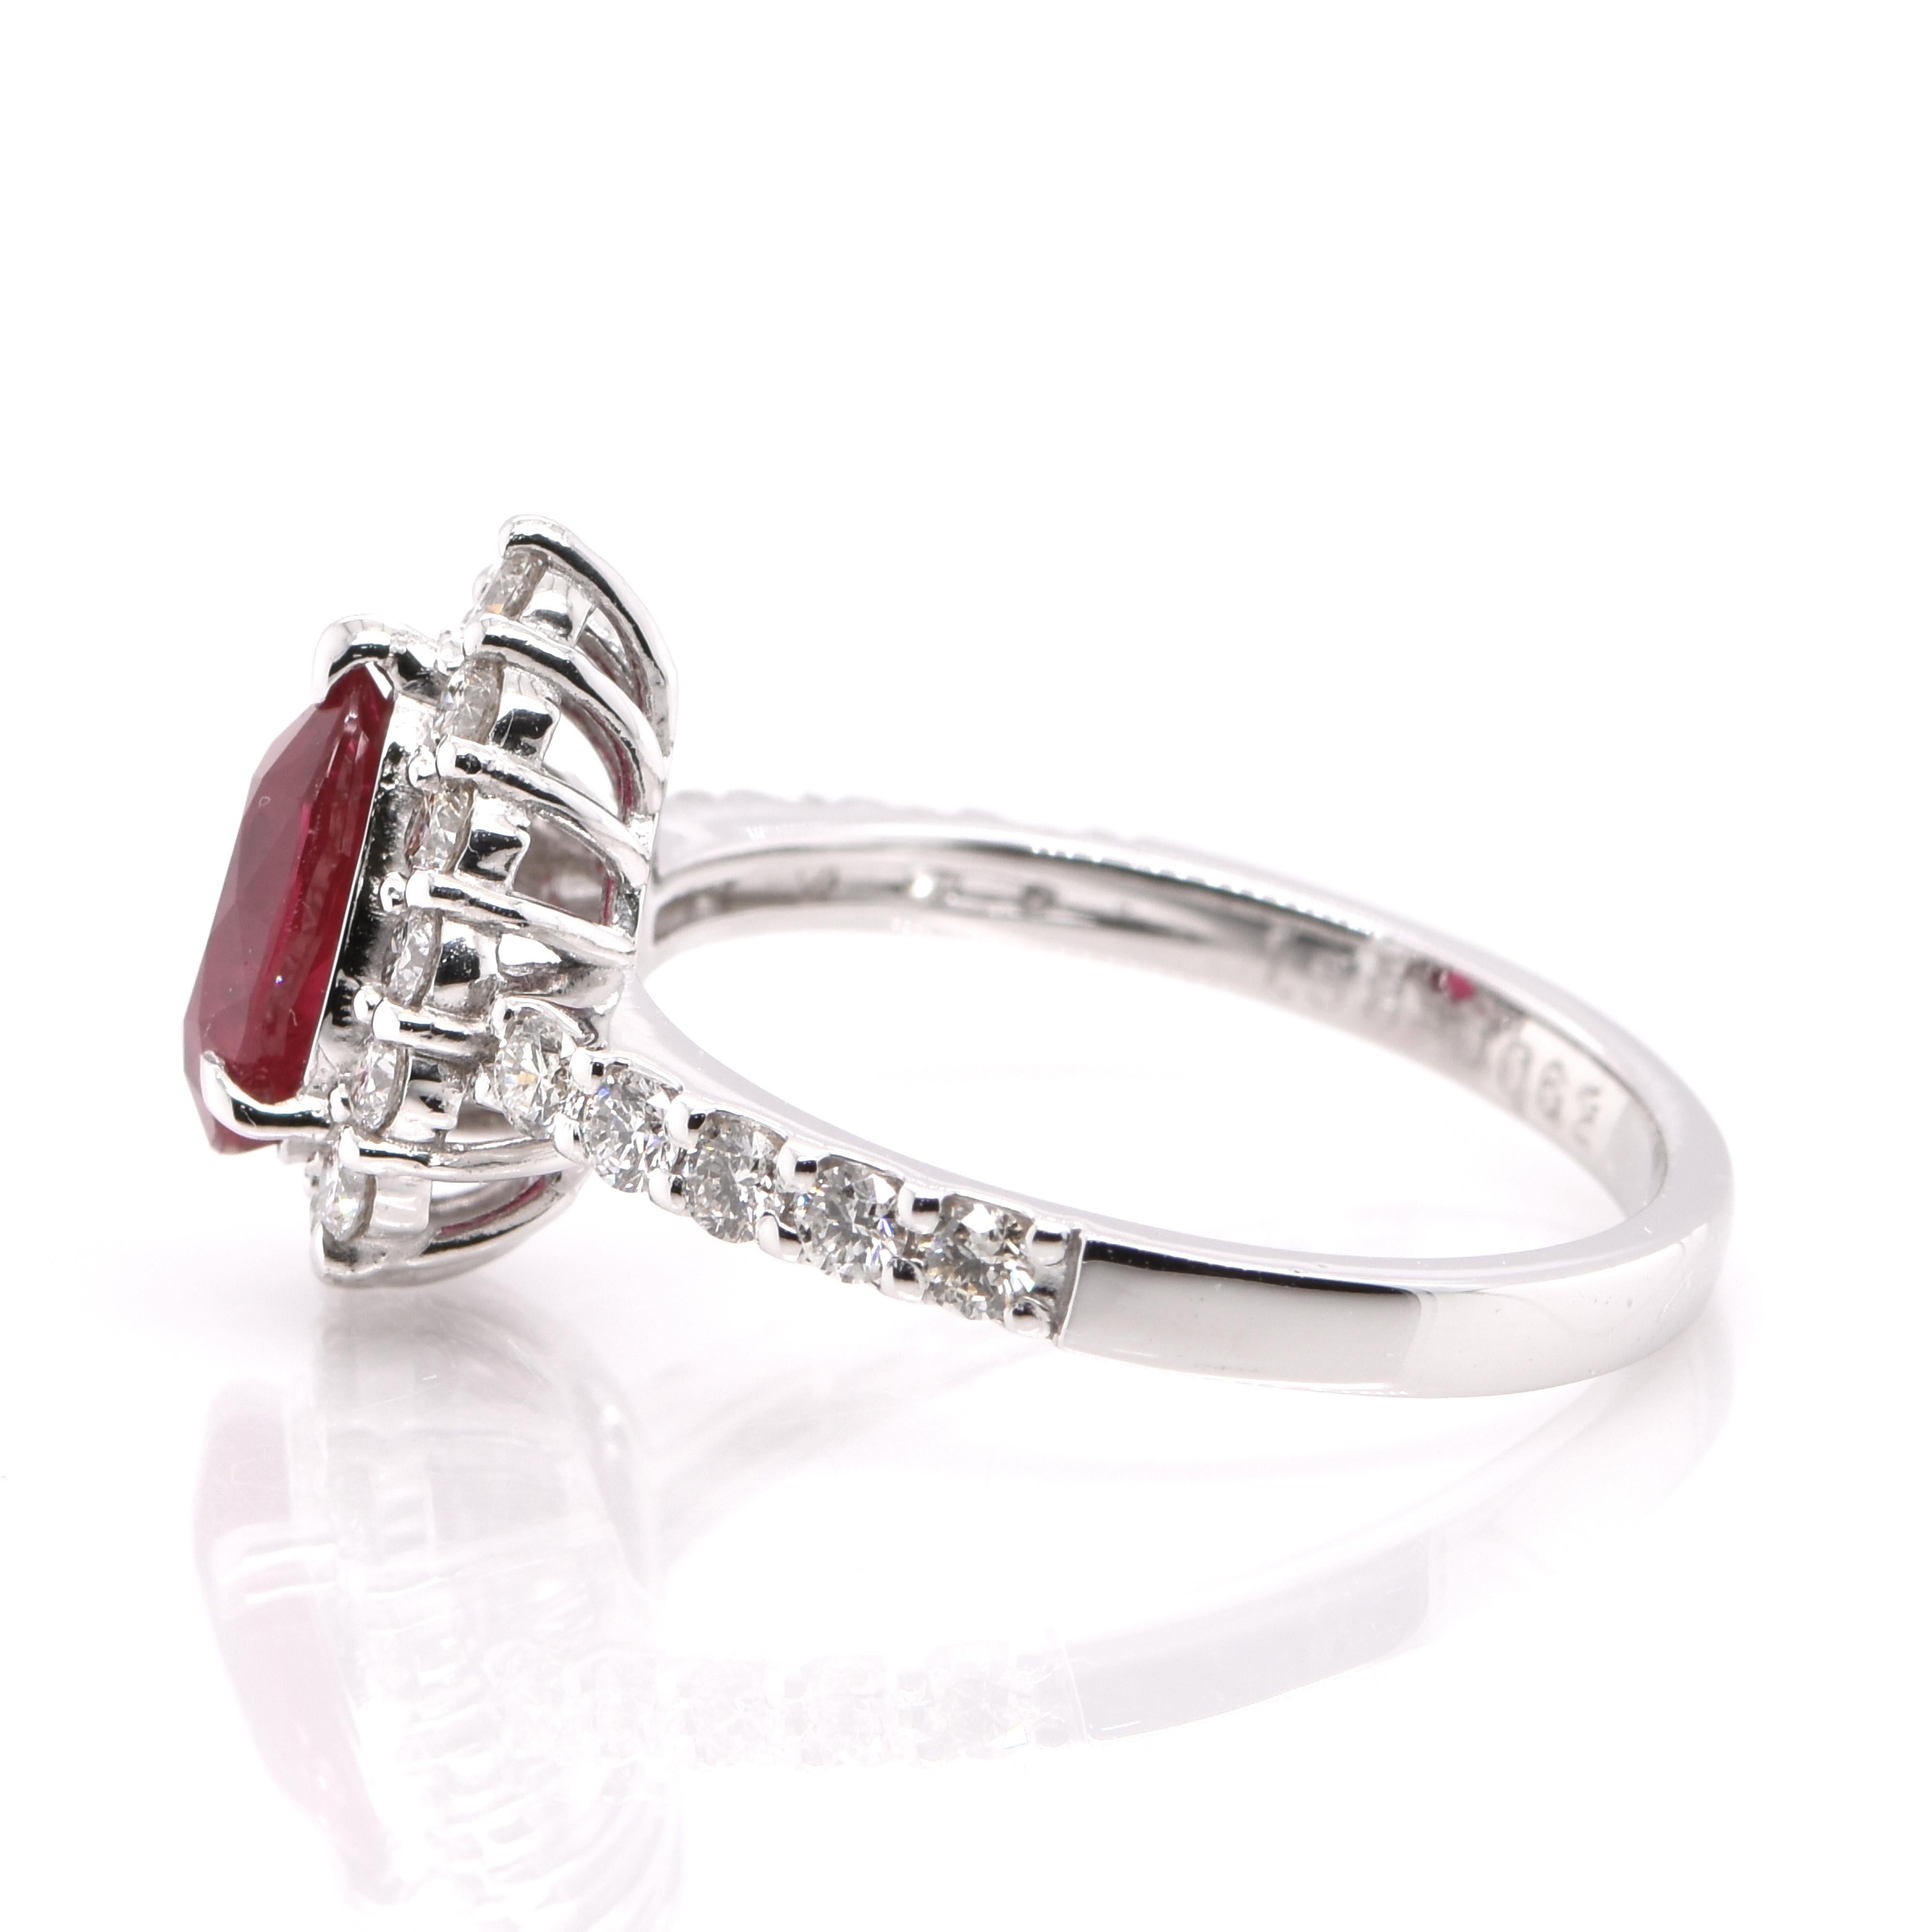 Modern GIA Certified 1.37 Carat Natural Pigeon's Blood Color Ruby Ring set in Platinum